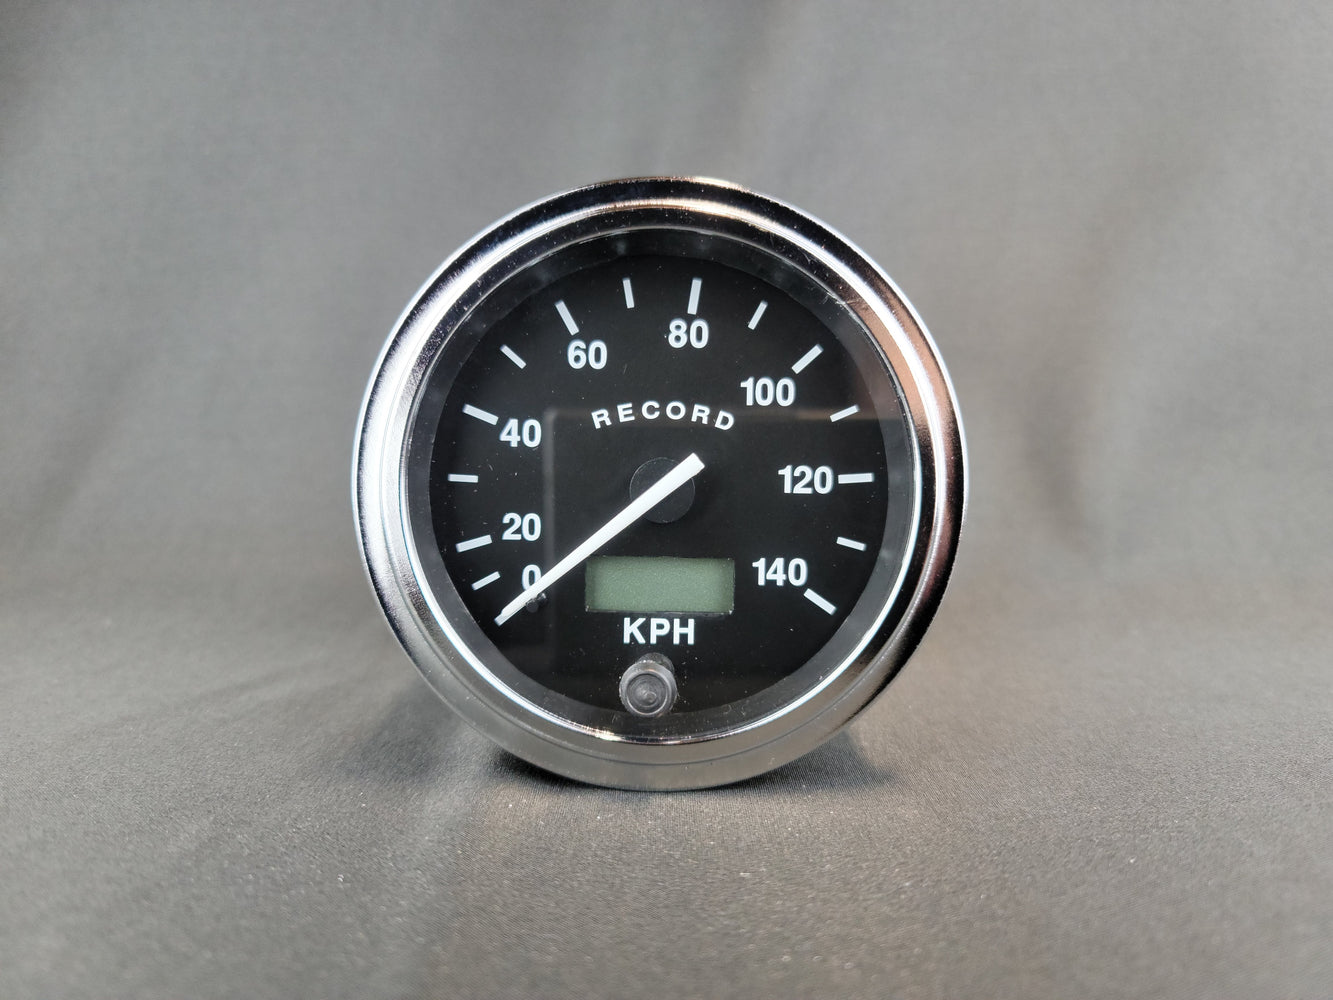 RECORD 3 3/8 Inch Electric Speedometer with Odometer - KPH - Chrome - R17412/24C